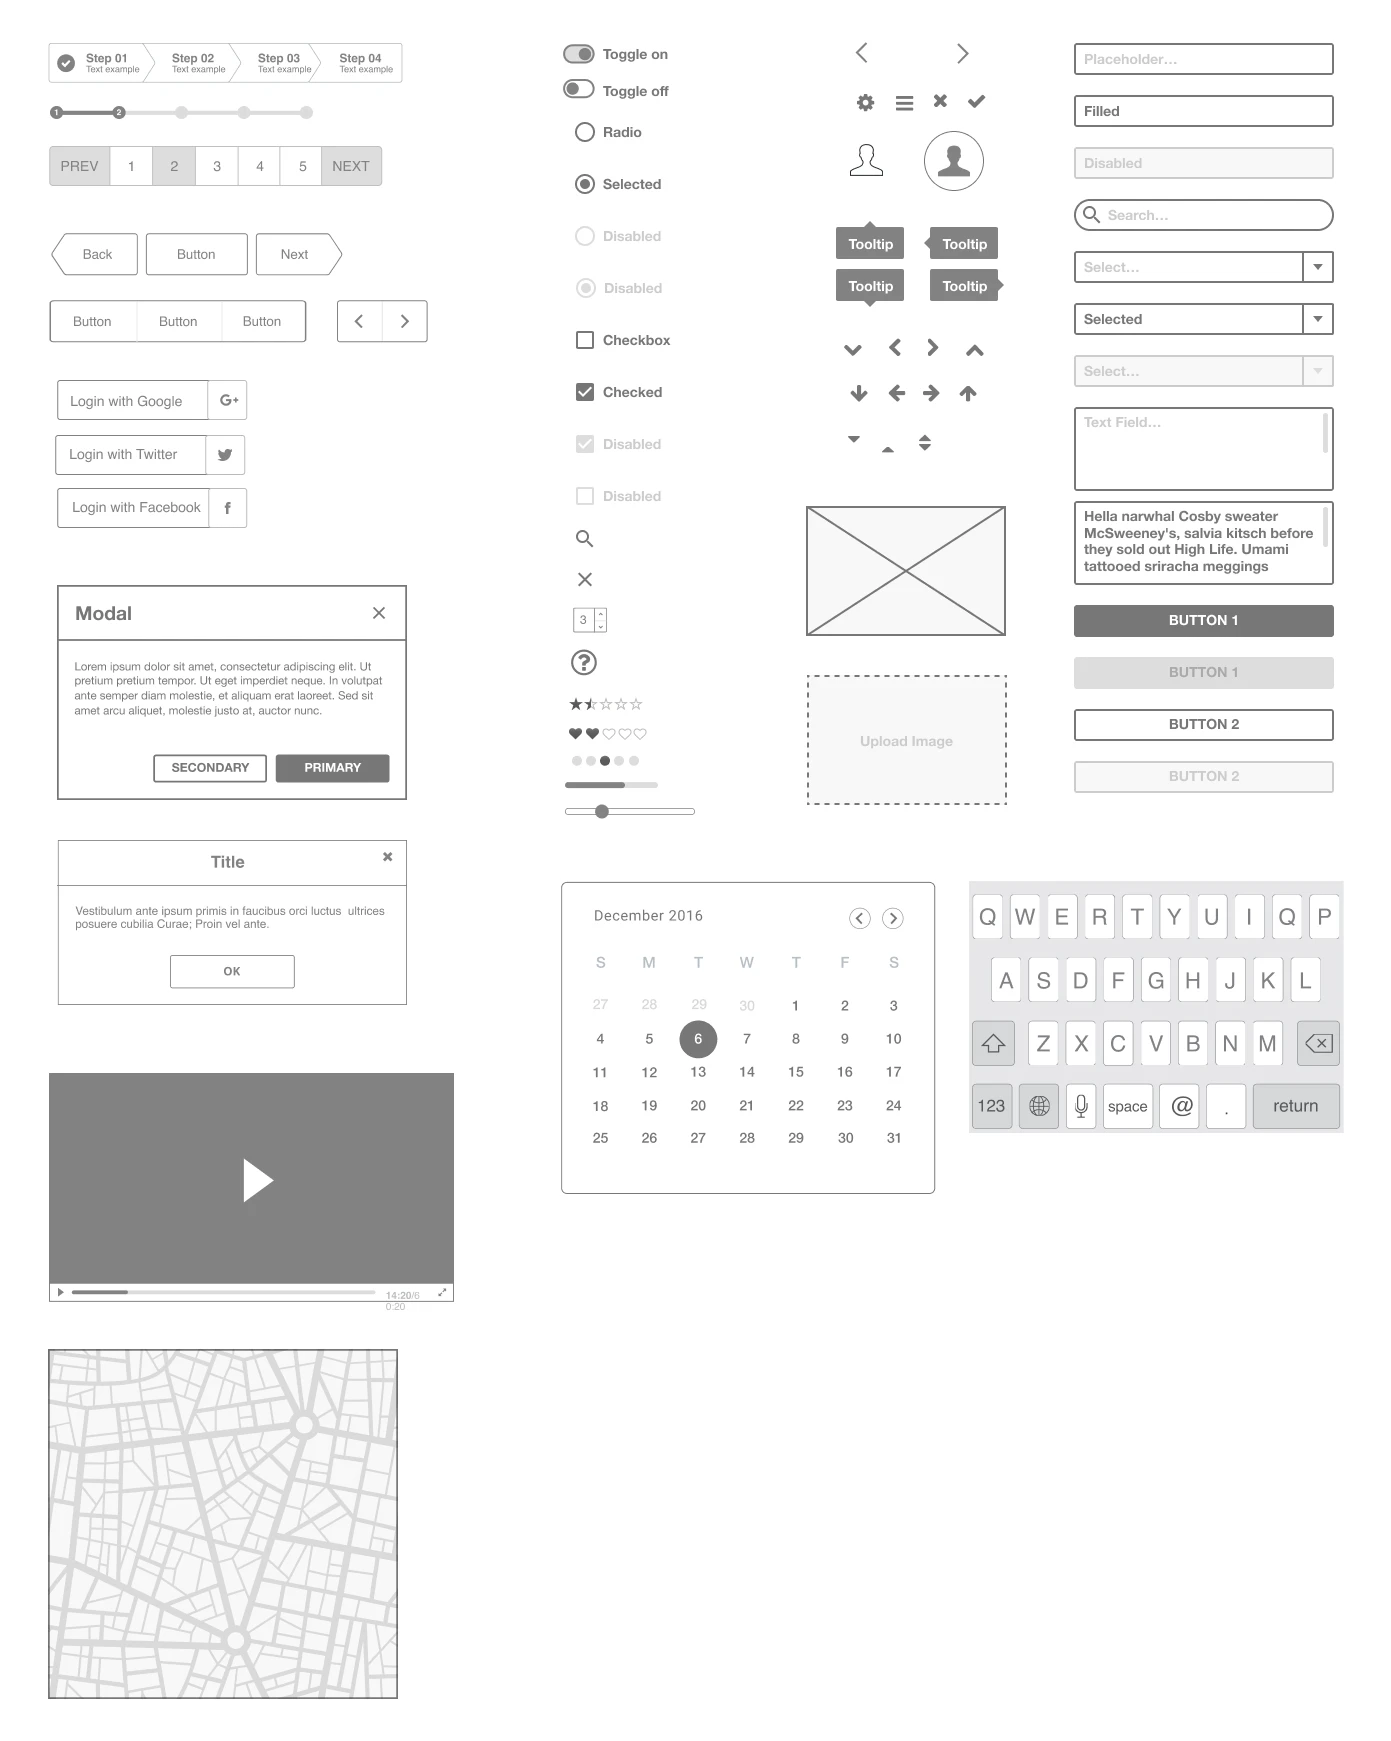 Ironhack Free Wireframe UI Kit for Figma - Use this wireframe kit to make your first steps as a UX/UI Designer using Figma. This kit contains useful bits and pieces, UI elements, and Interface components to rapidly build your designs, convey your ideas or test.